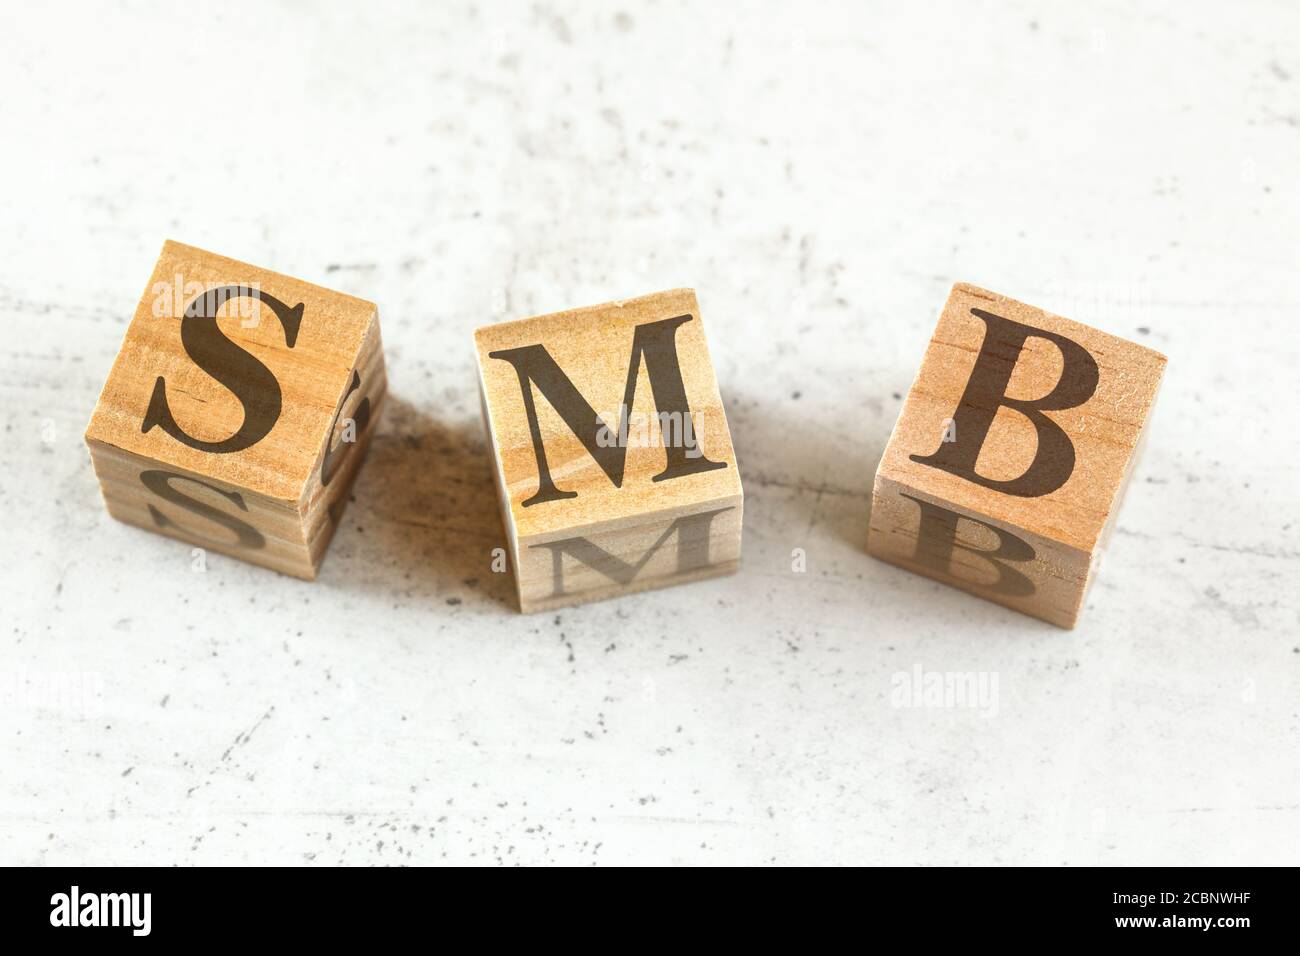 Three wooden cubes with letters SMB (stands for Small to medium Business) on white board. Stock Photo